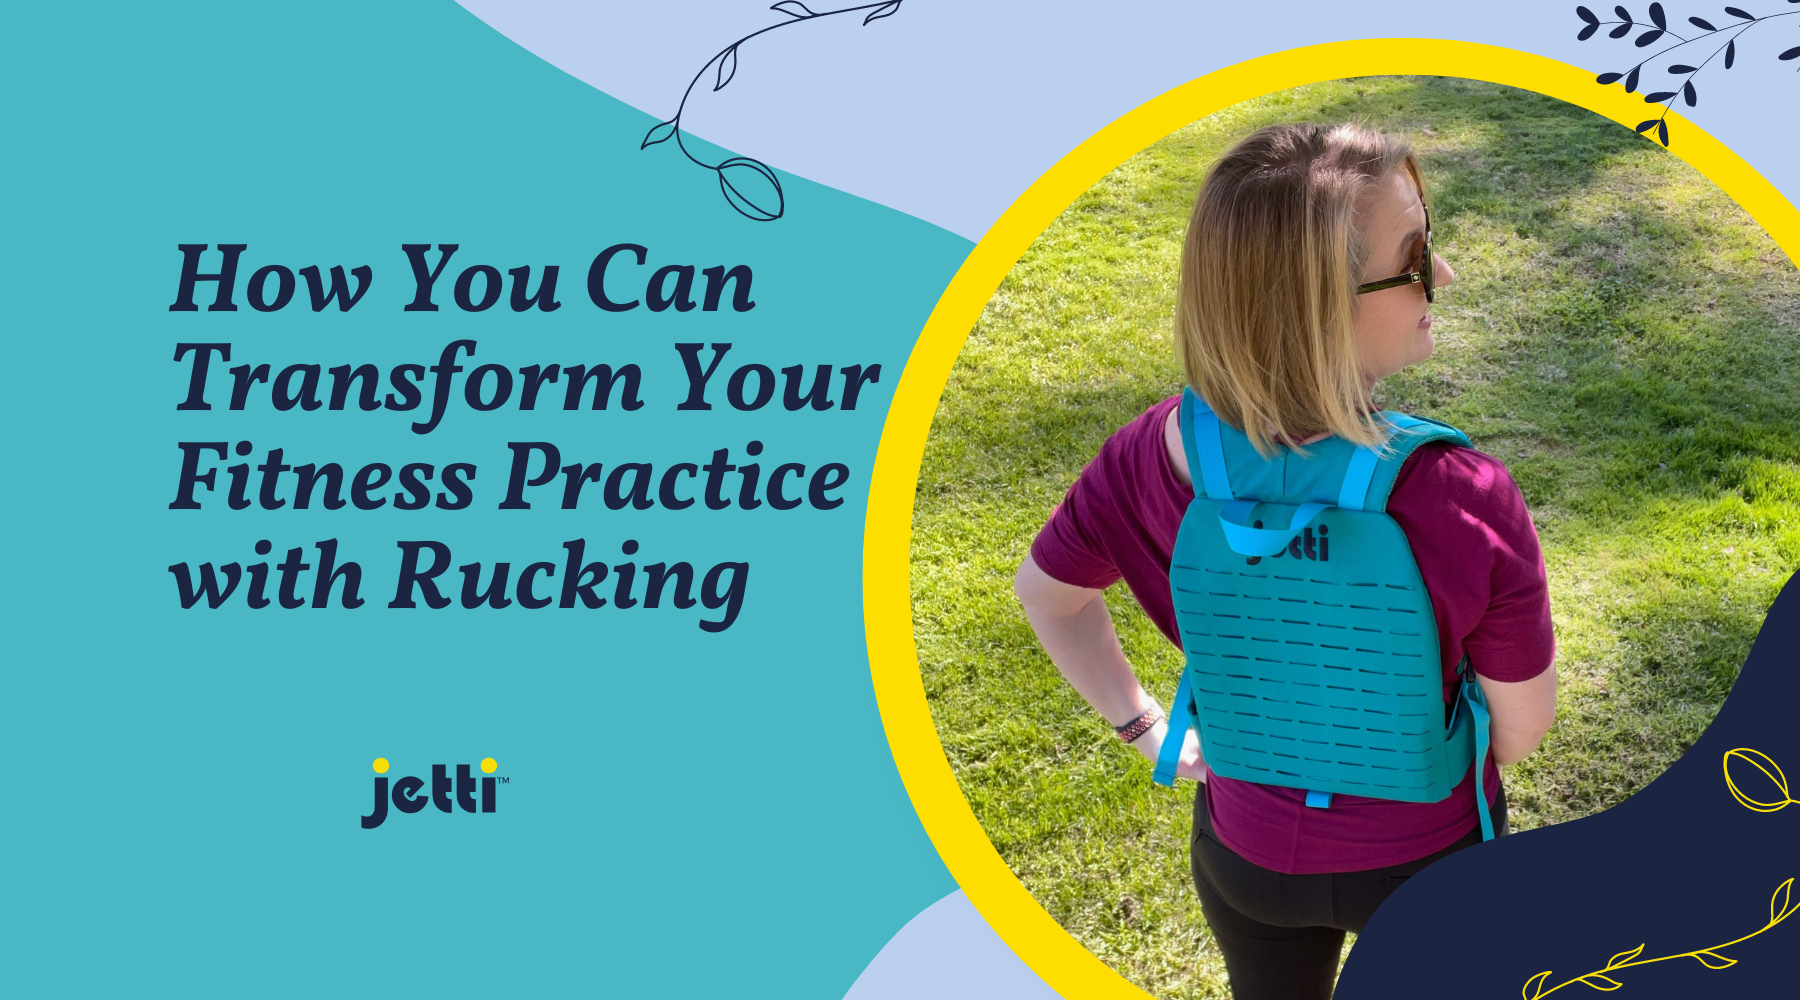 How You Can Transform Your Fitness Practice with Rucking